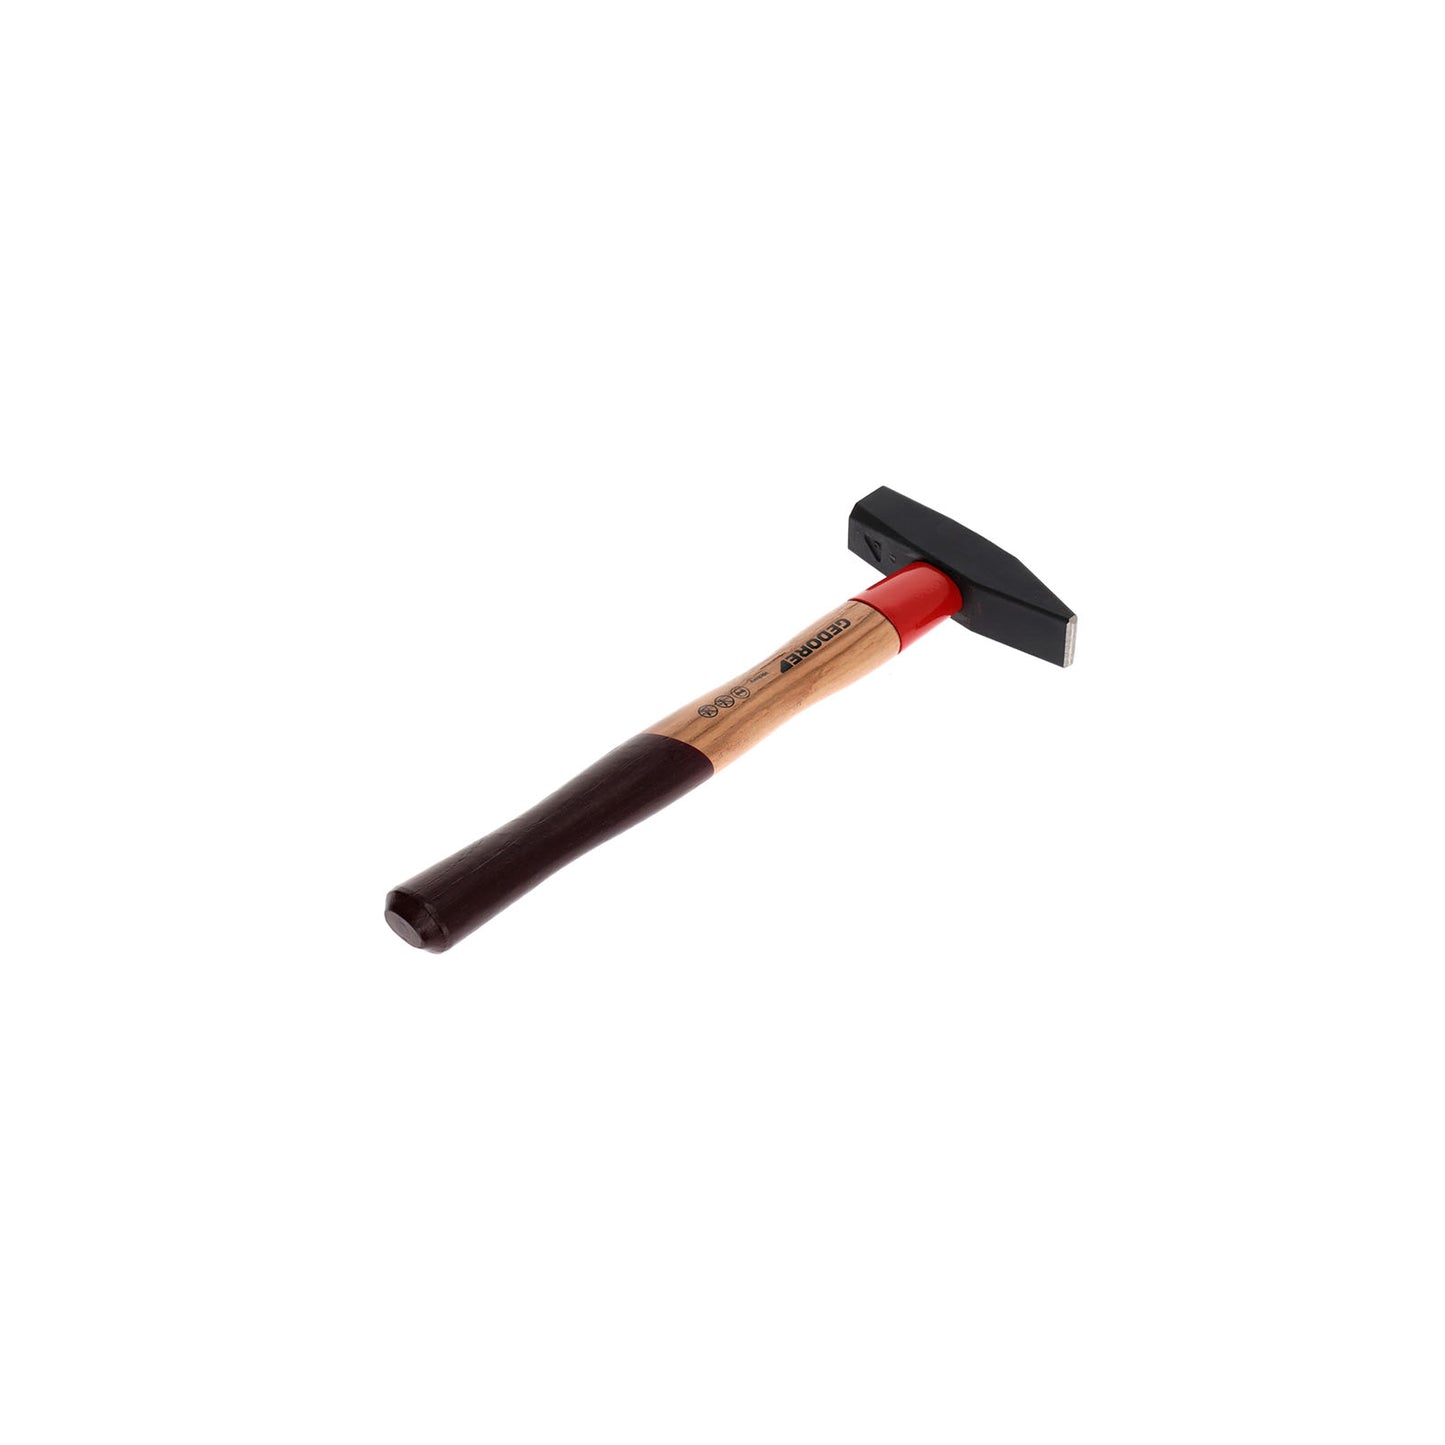 GEDORE 600 H-500 - ROTBAND assembly hammer 500g (8583230)